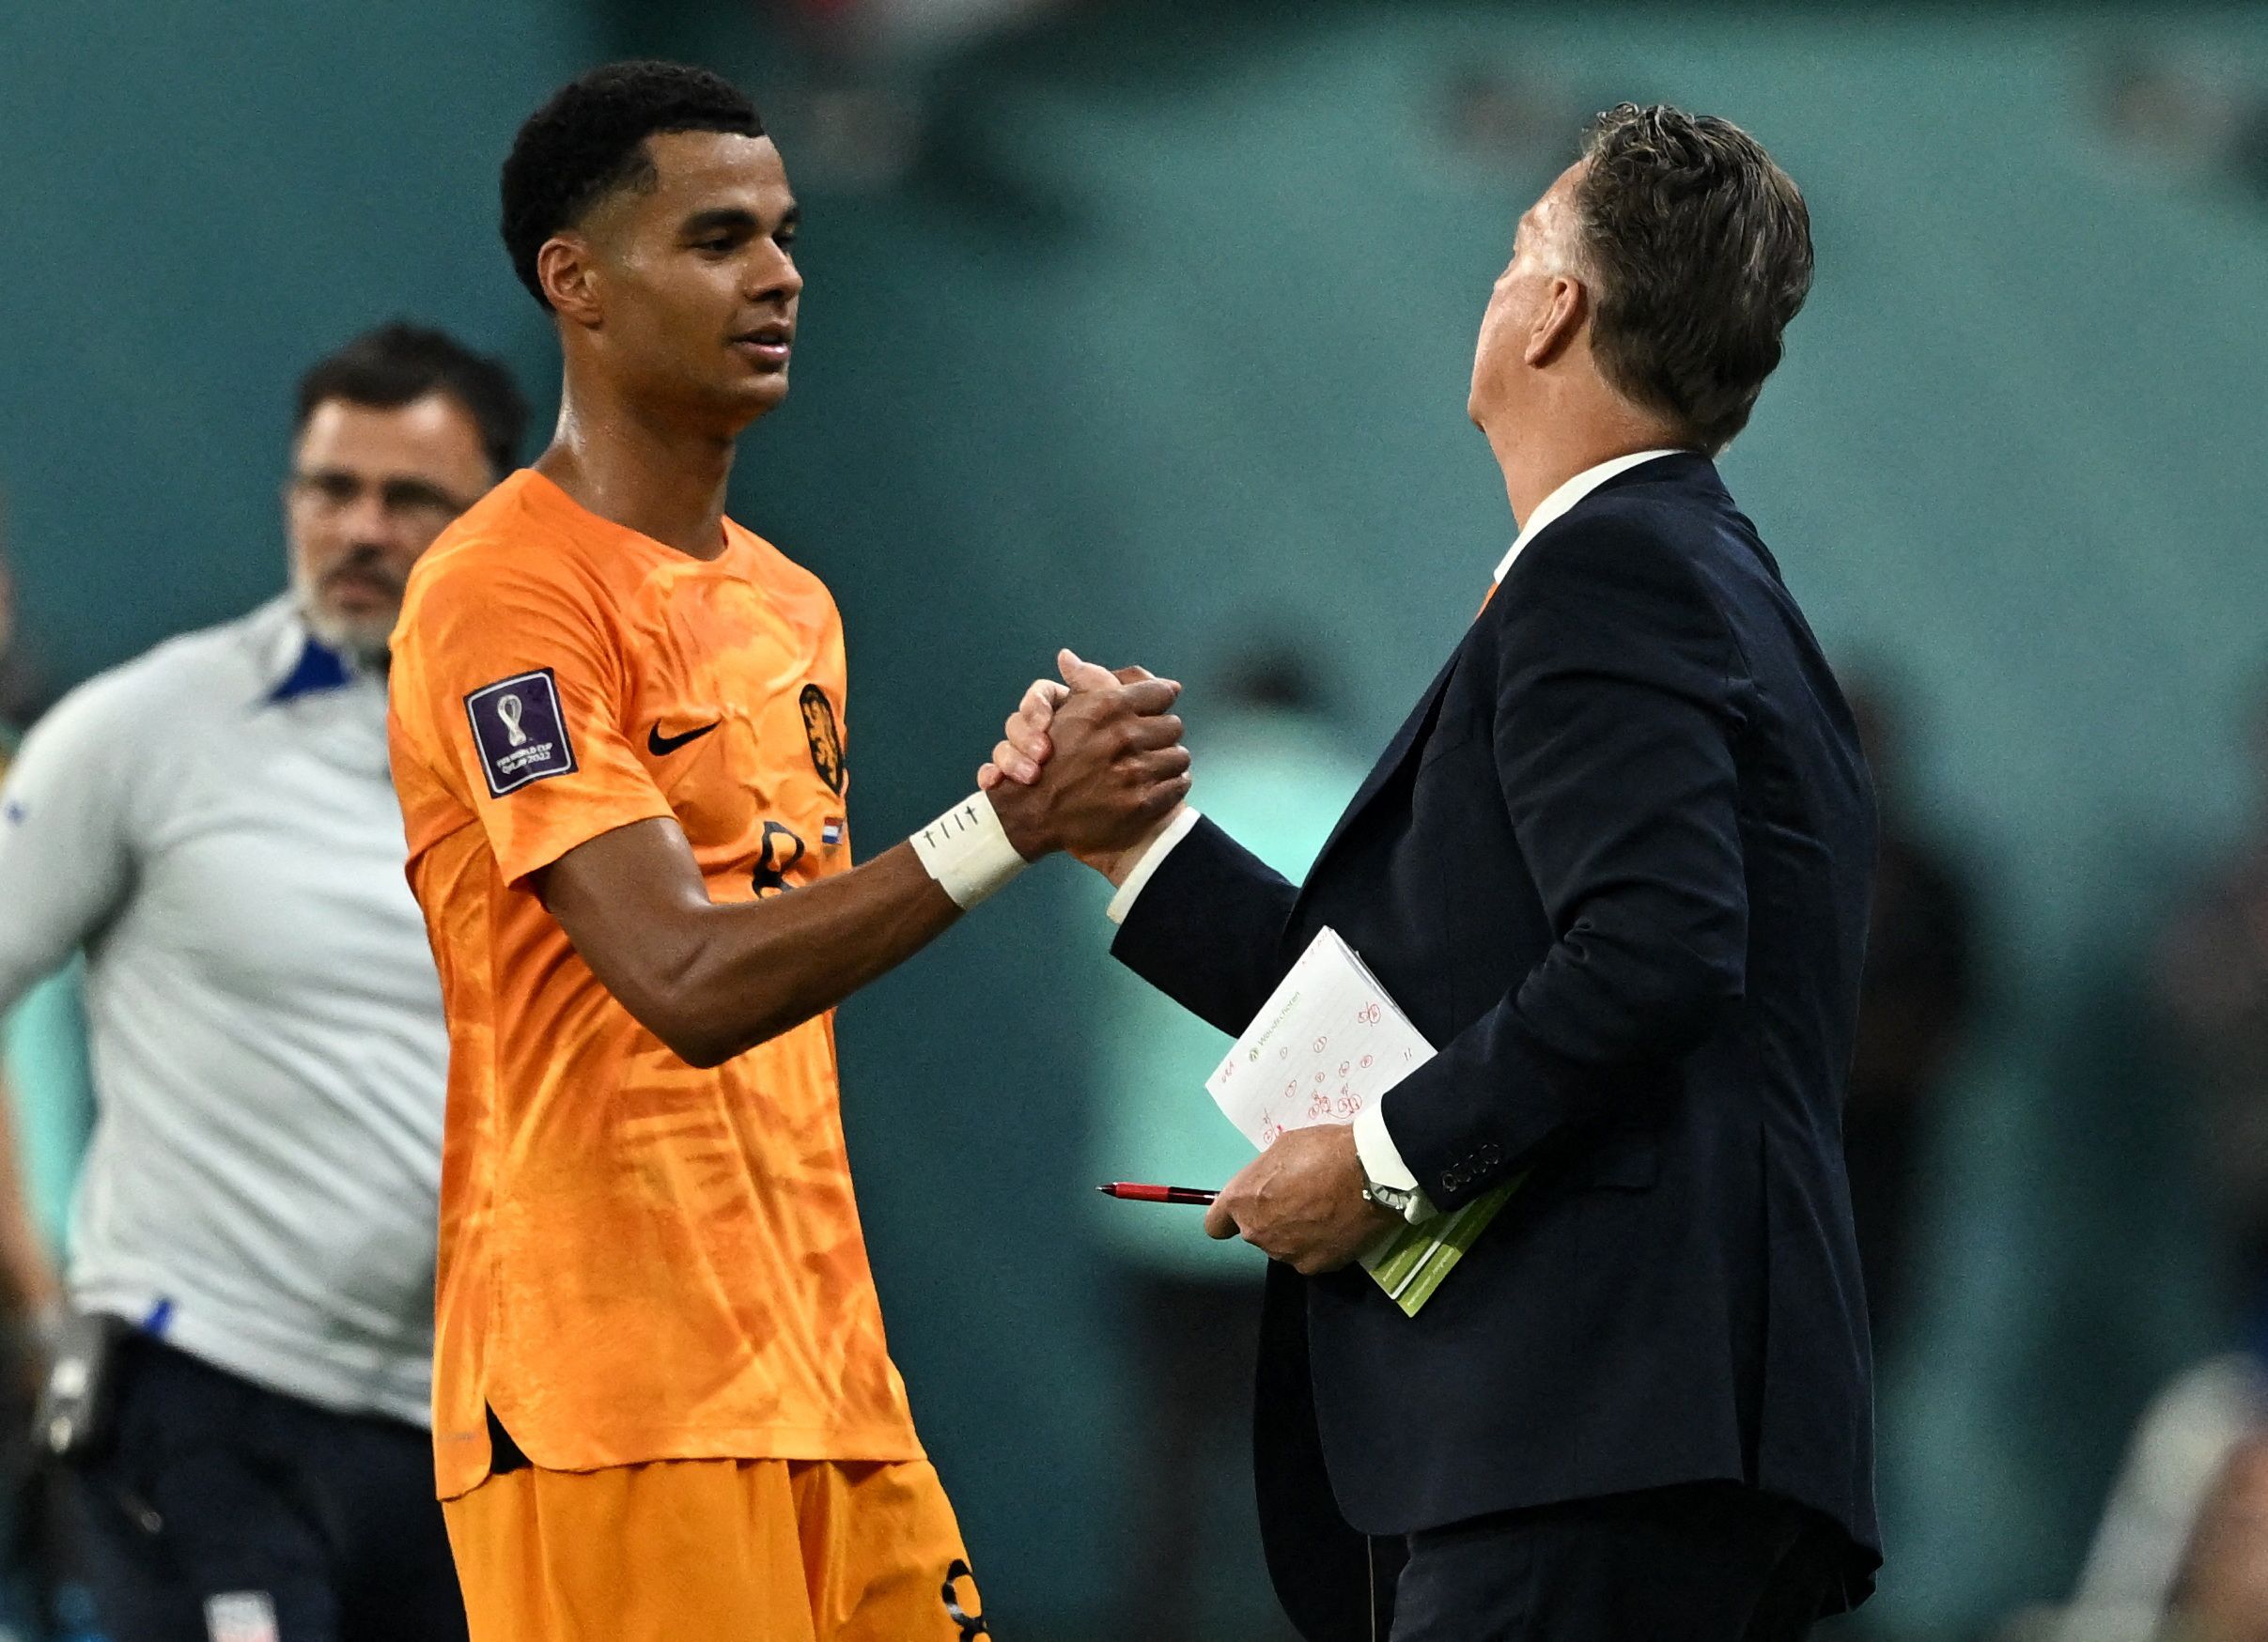 Soccer Football - FIFA World Cup Qatar 2022 - Round of 16 - Netherlands v United States - Khalifa International Stadium, Doha, Qatar - December 3, 2022 Netherlands' Cody Gakpo shakes hands with coach Louis van Gaal after being substituted REUTERS/Dylan Martinez